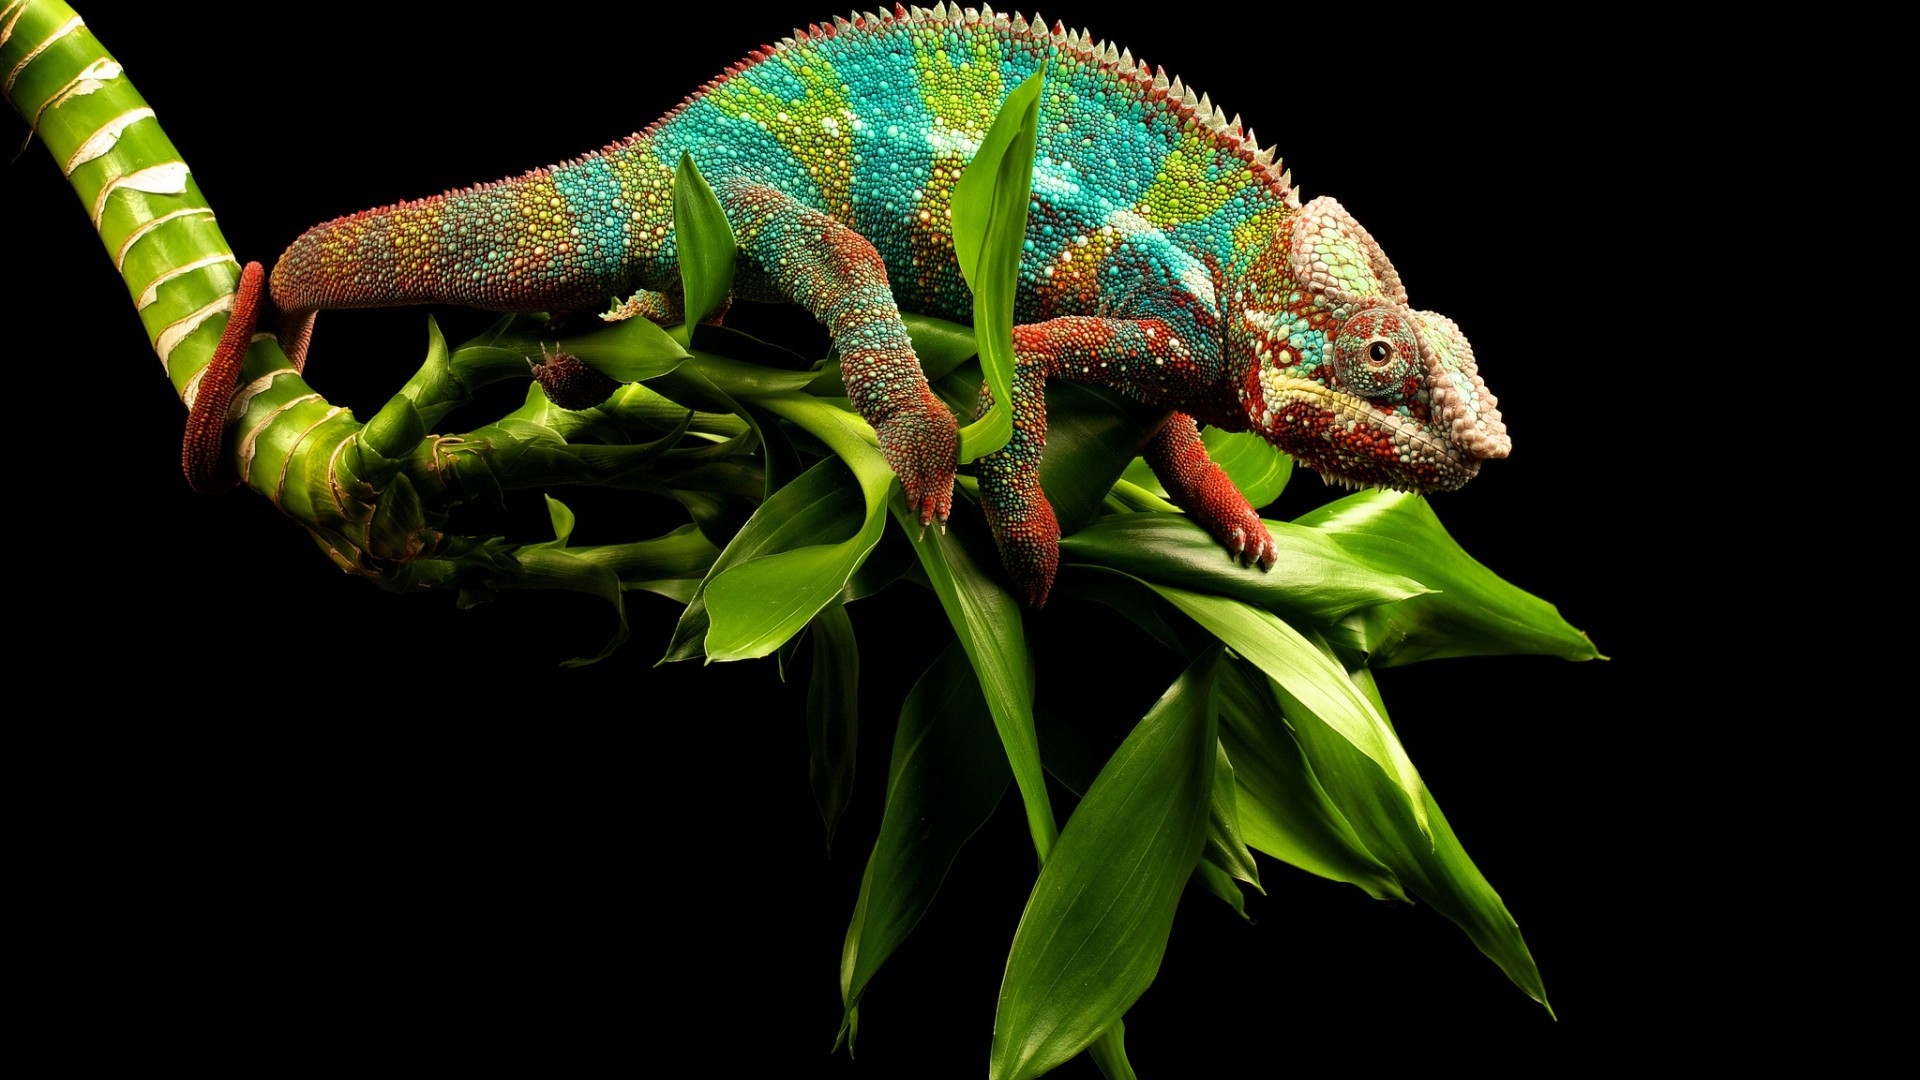 Young Chameleon for 1920 x 1080 HDTV 1080p resolution